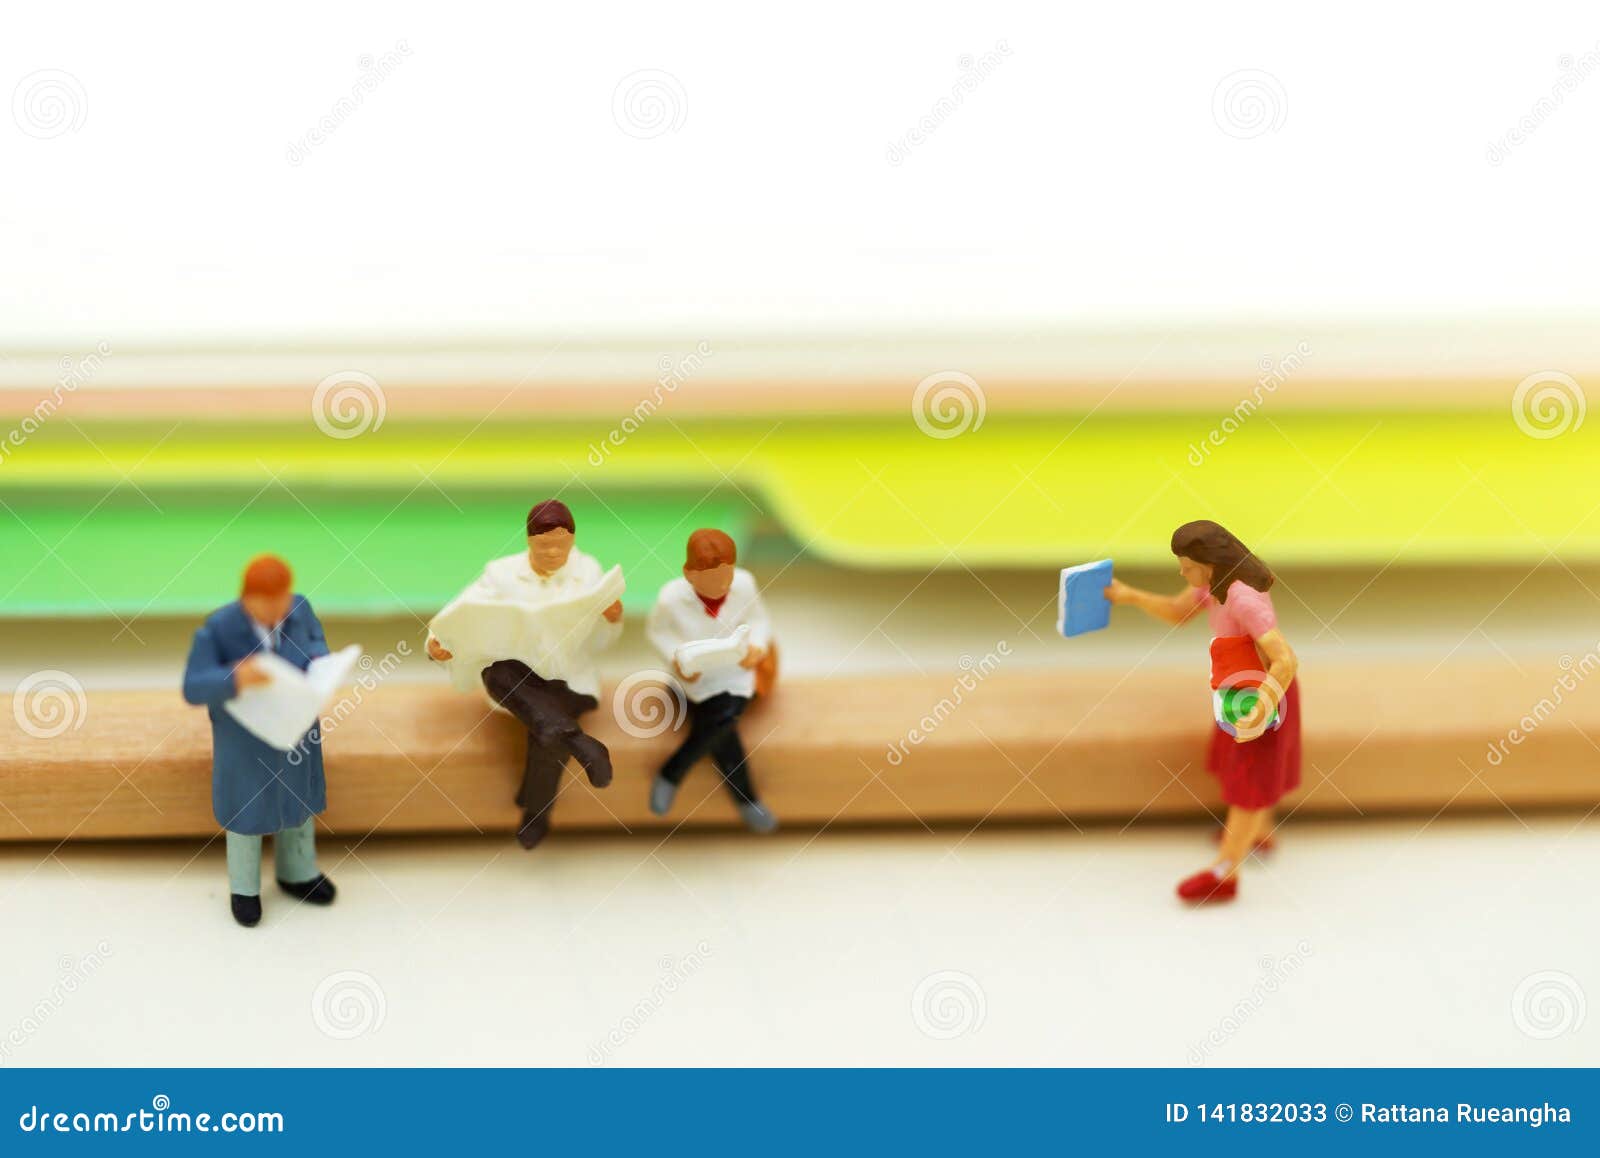 Miniature People: Business Team Reading Book, Education or Business ...